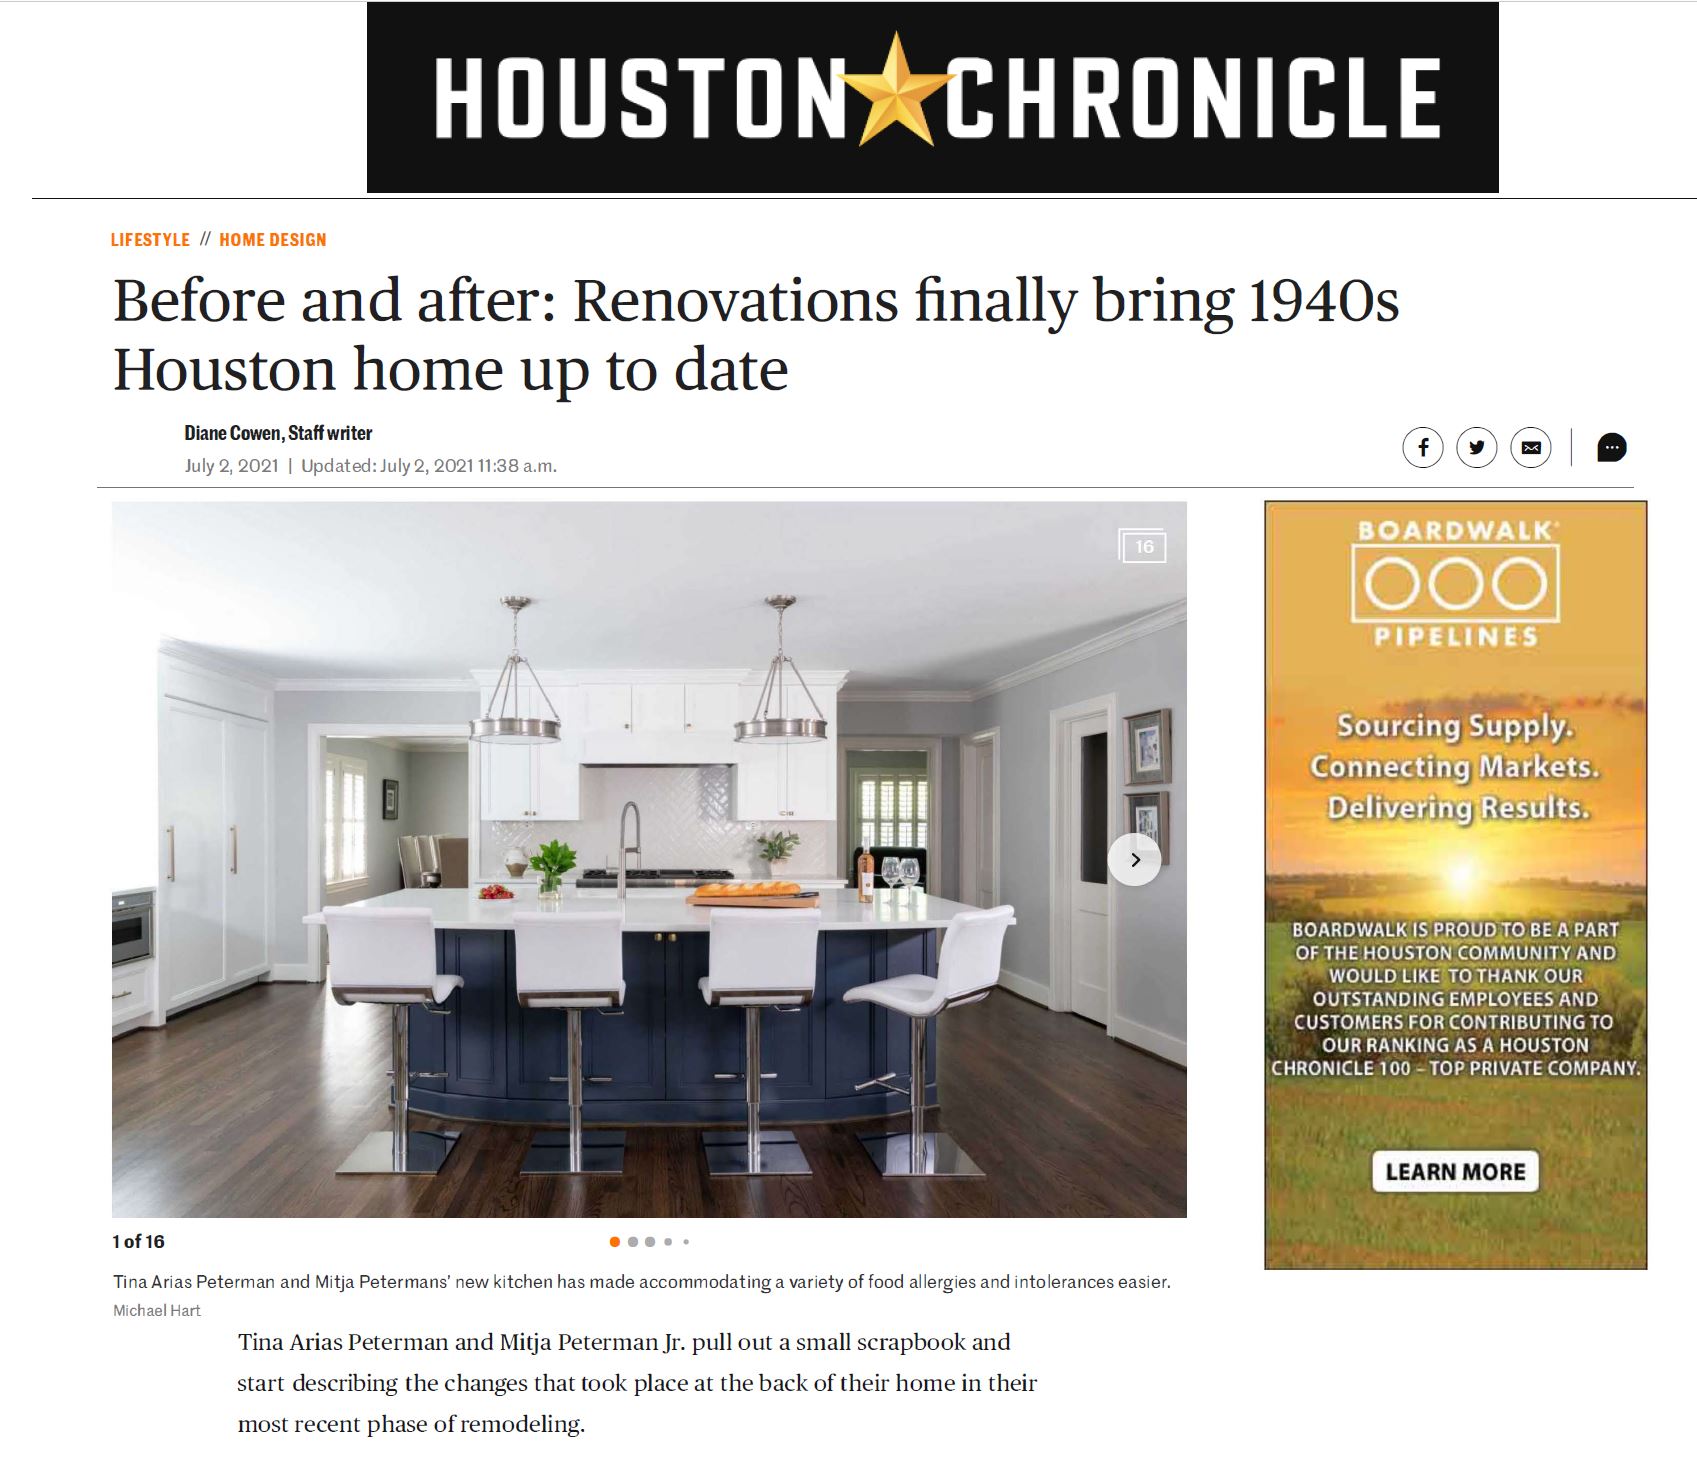 Houston Chronicle features home renovation by Pamela Hope Designs